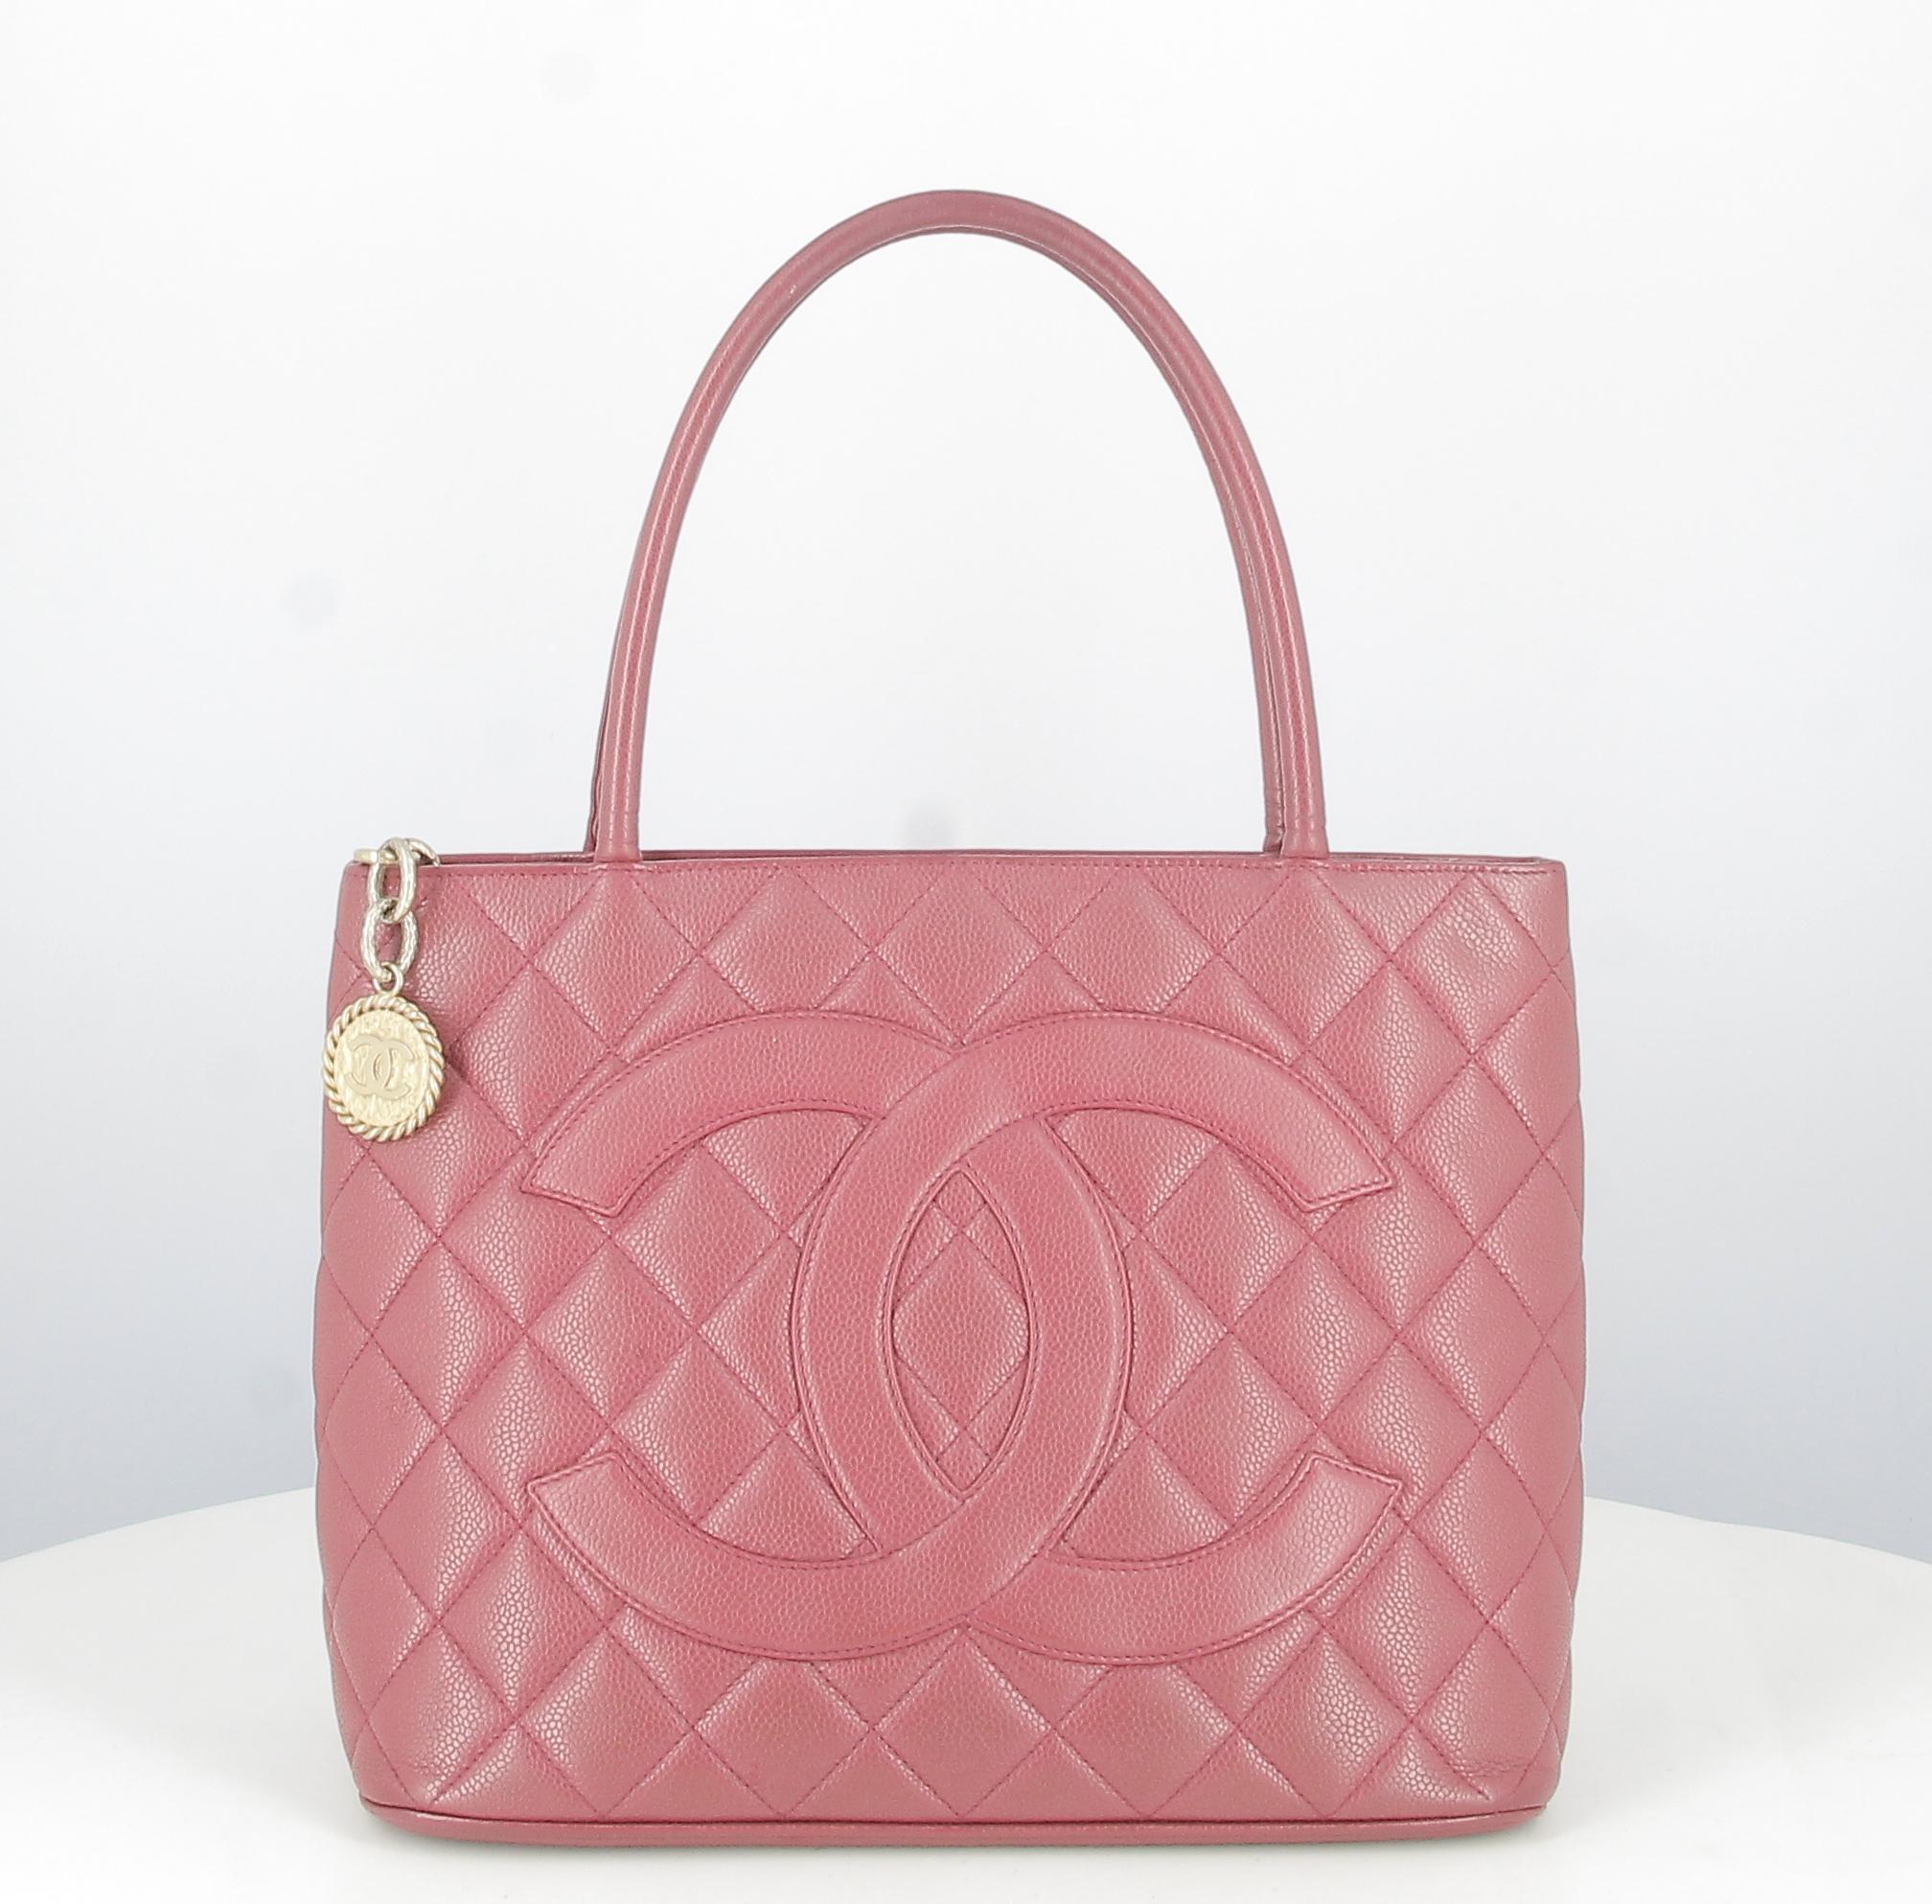 1999 Chanel Fushia Padded Leather Medallion Handbag 

- Very good condition. Shows signs of wear over time.
- Chanel Handbag 
- Medallion
- Colours : Fushia 
- Leather strap 
- Double C on the front
- Pocket on back of bag 
- Inside: leather and zip